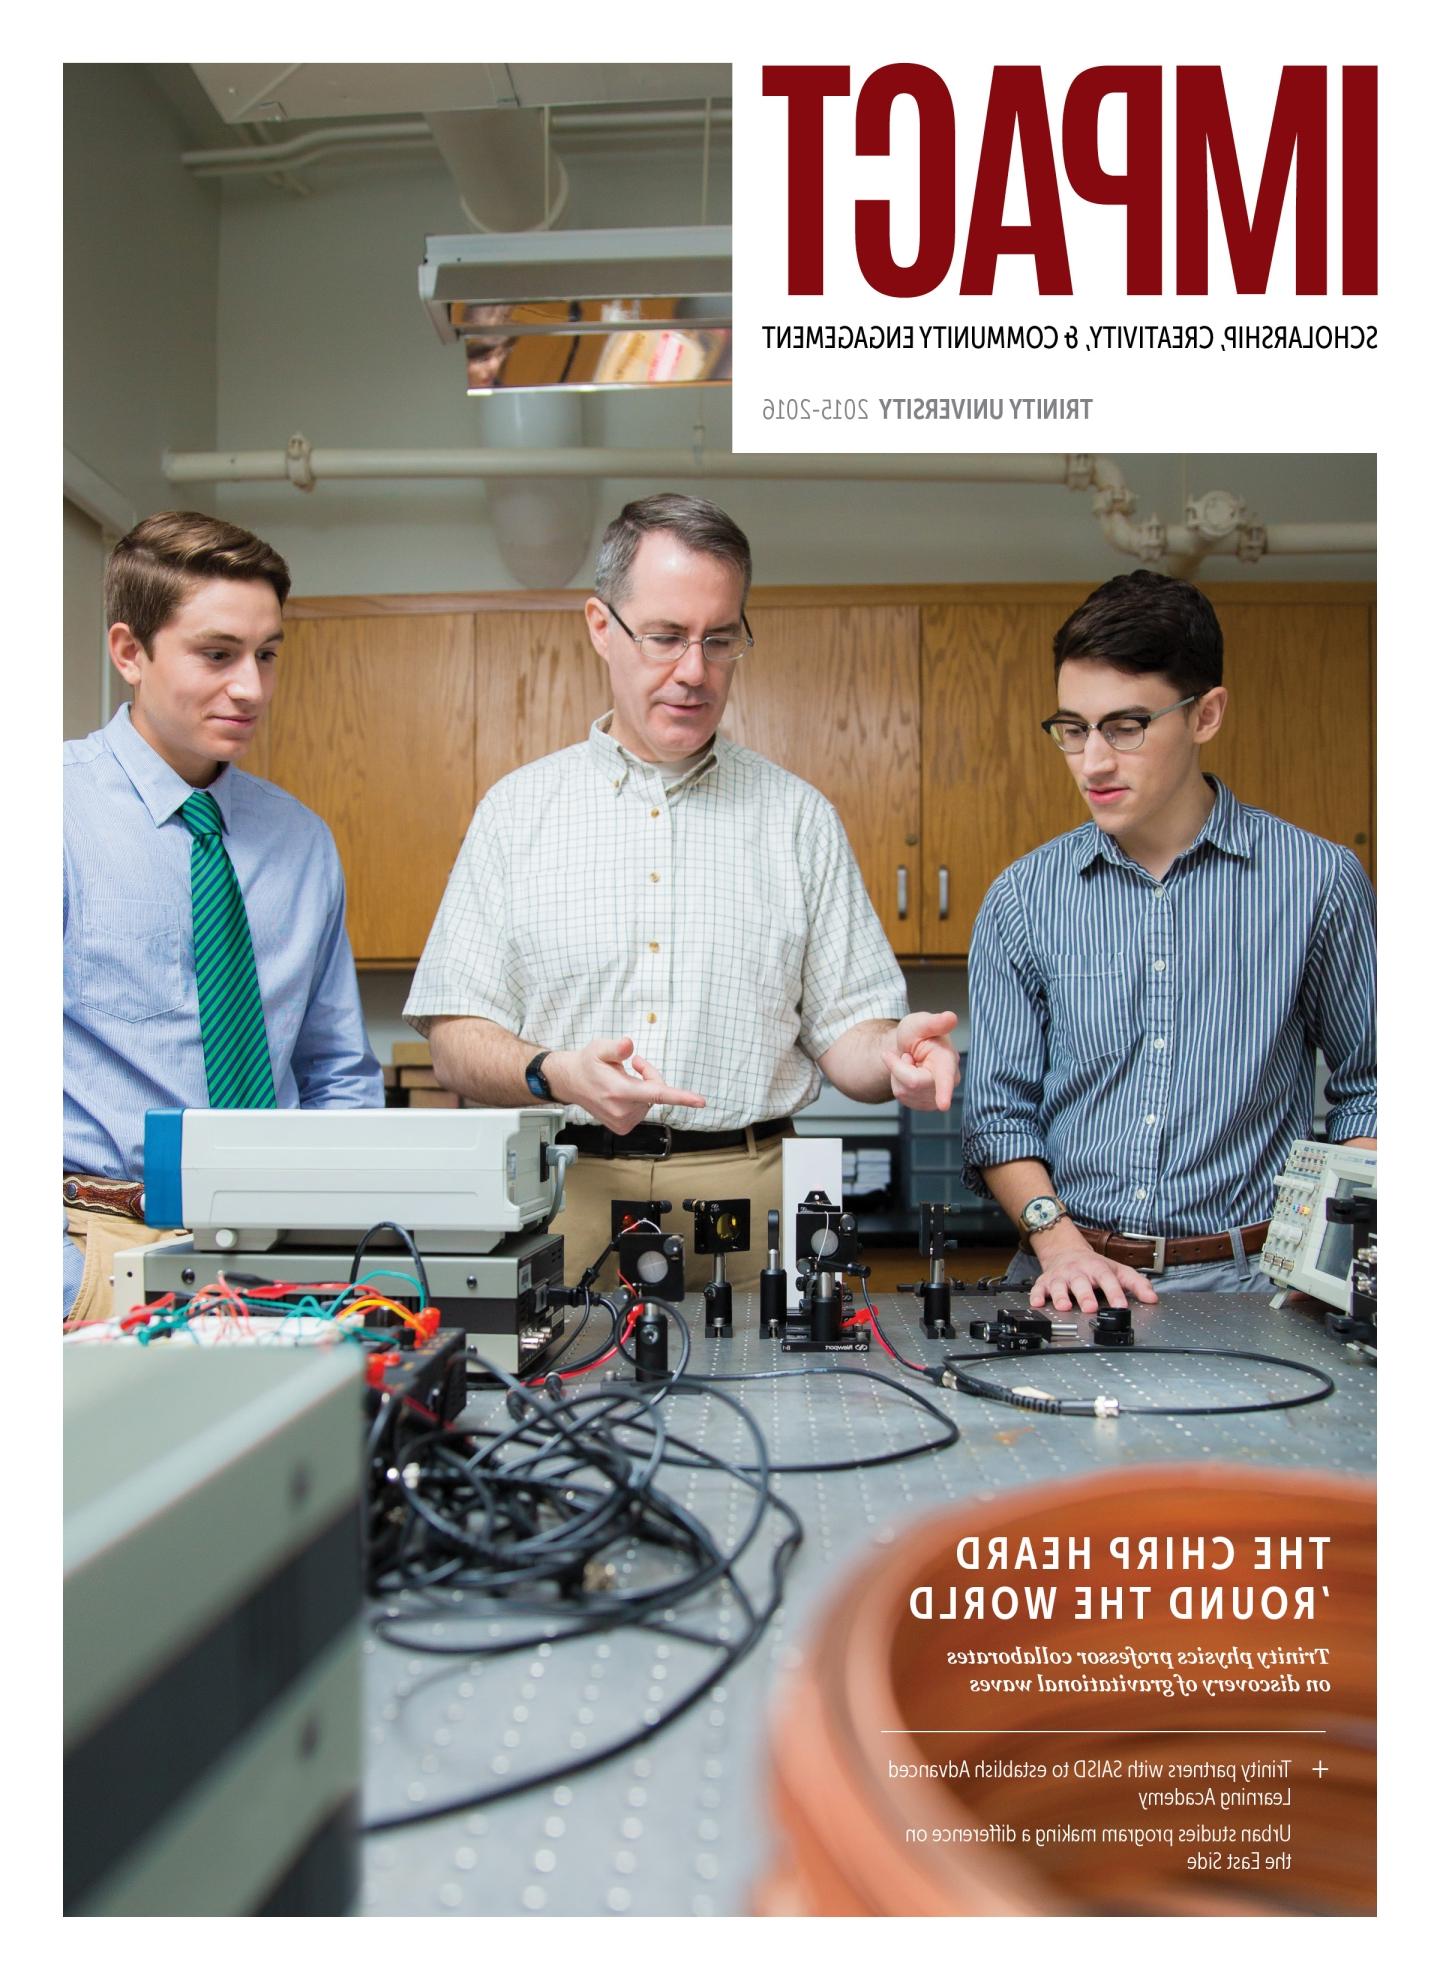 Cover image of IMPACT No 1 featuring Dennis Ugolini and 2 students